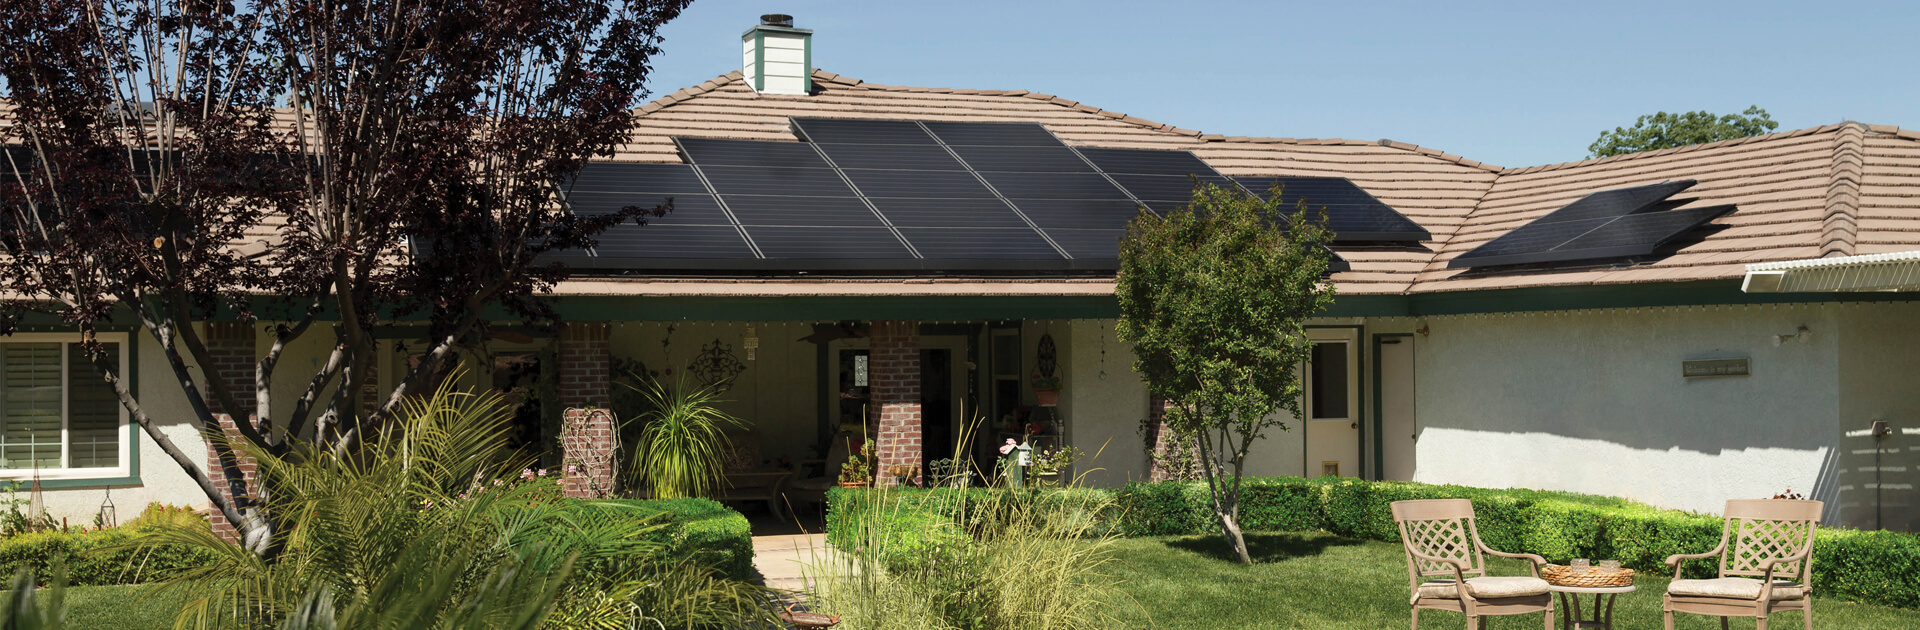 residential home with solar panels installed on the roof